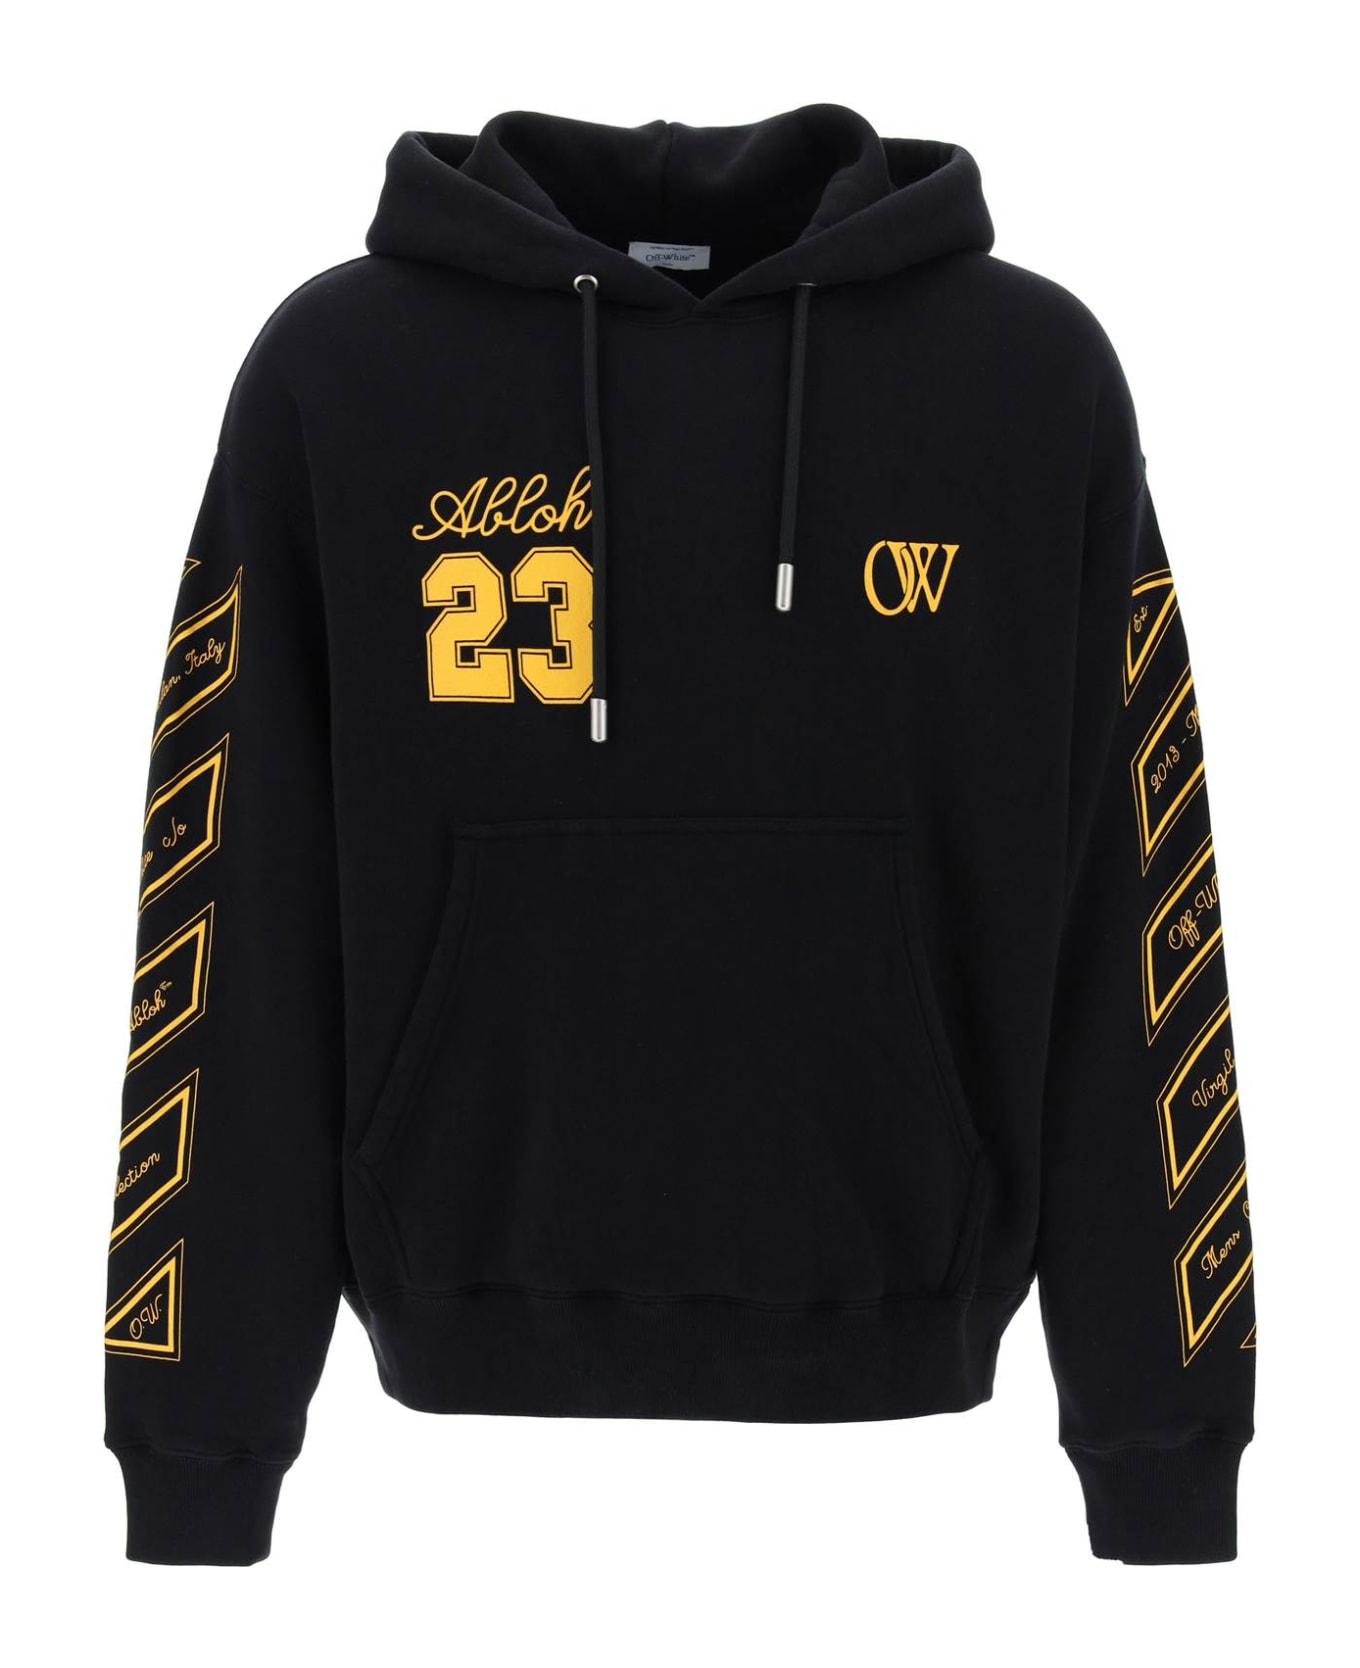 Off-White Hoodie - Black Gold Fusion